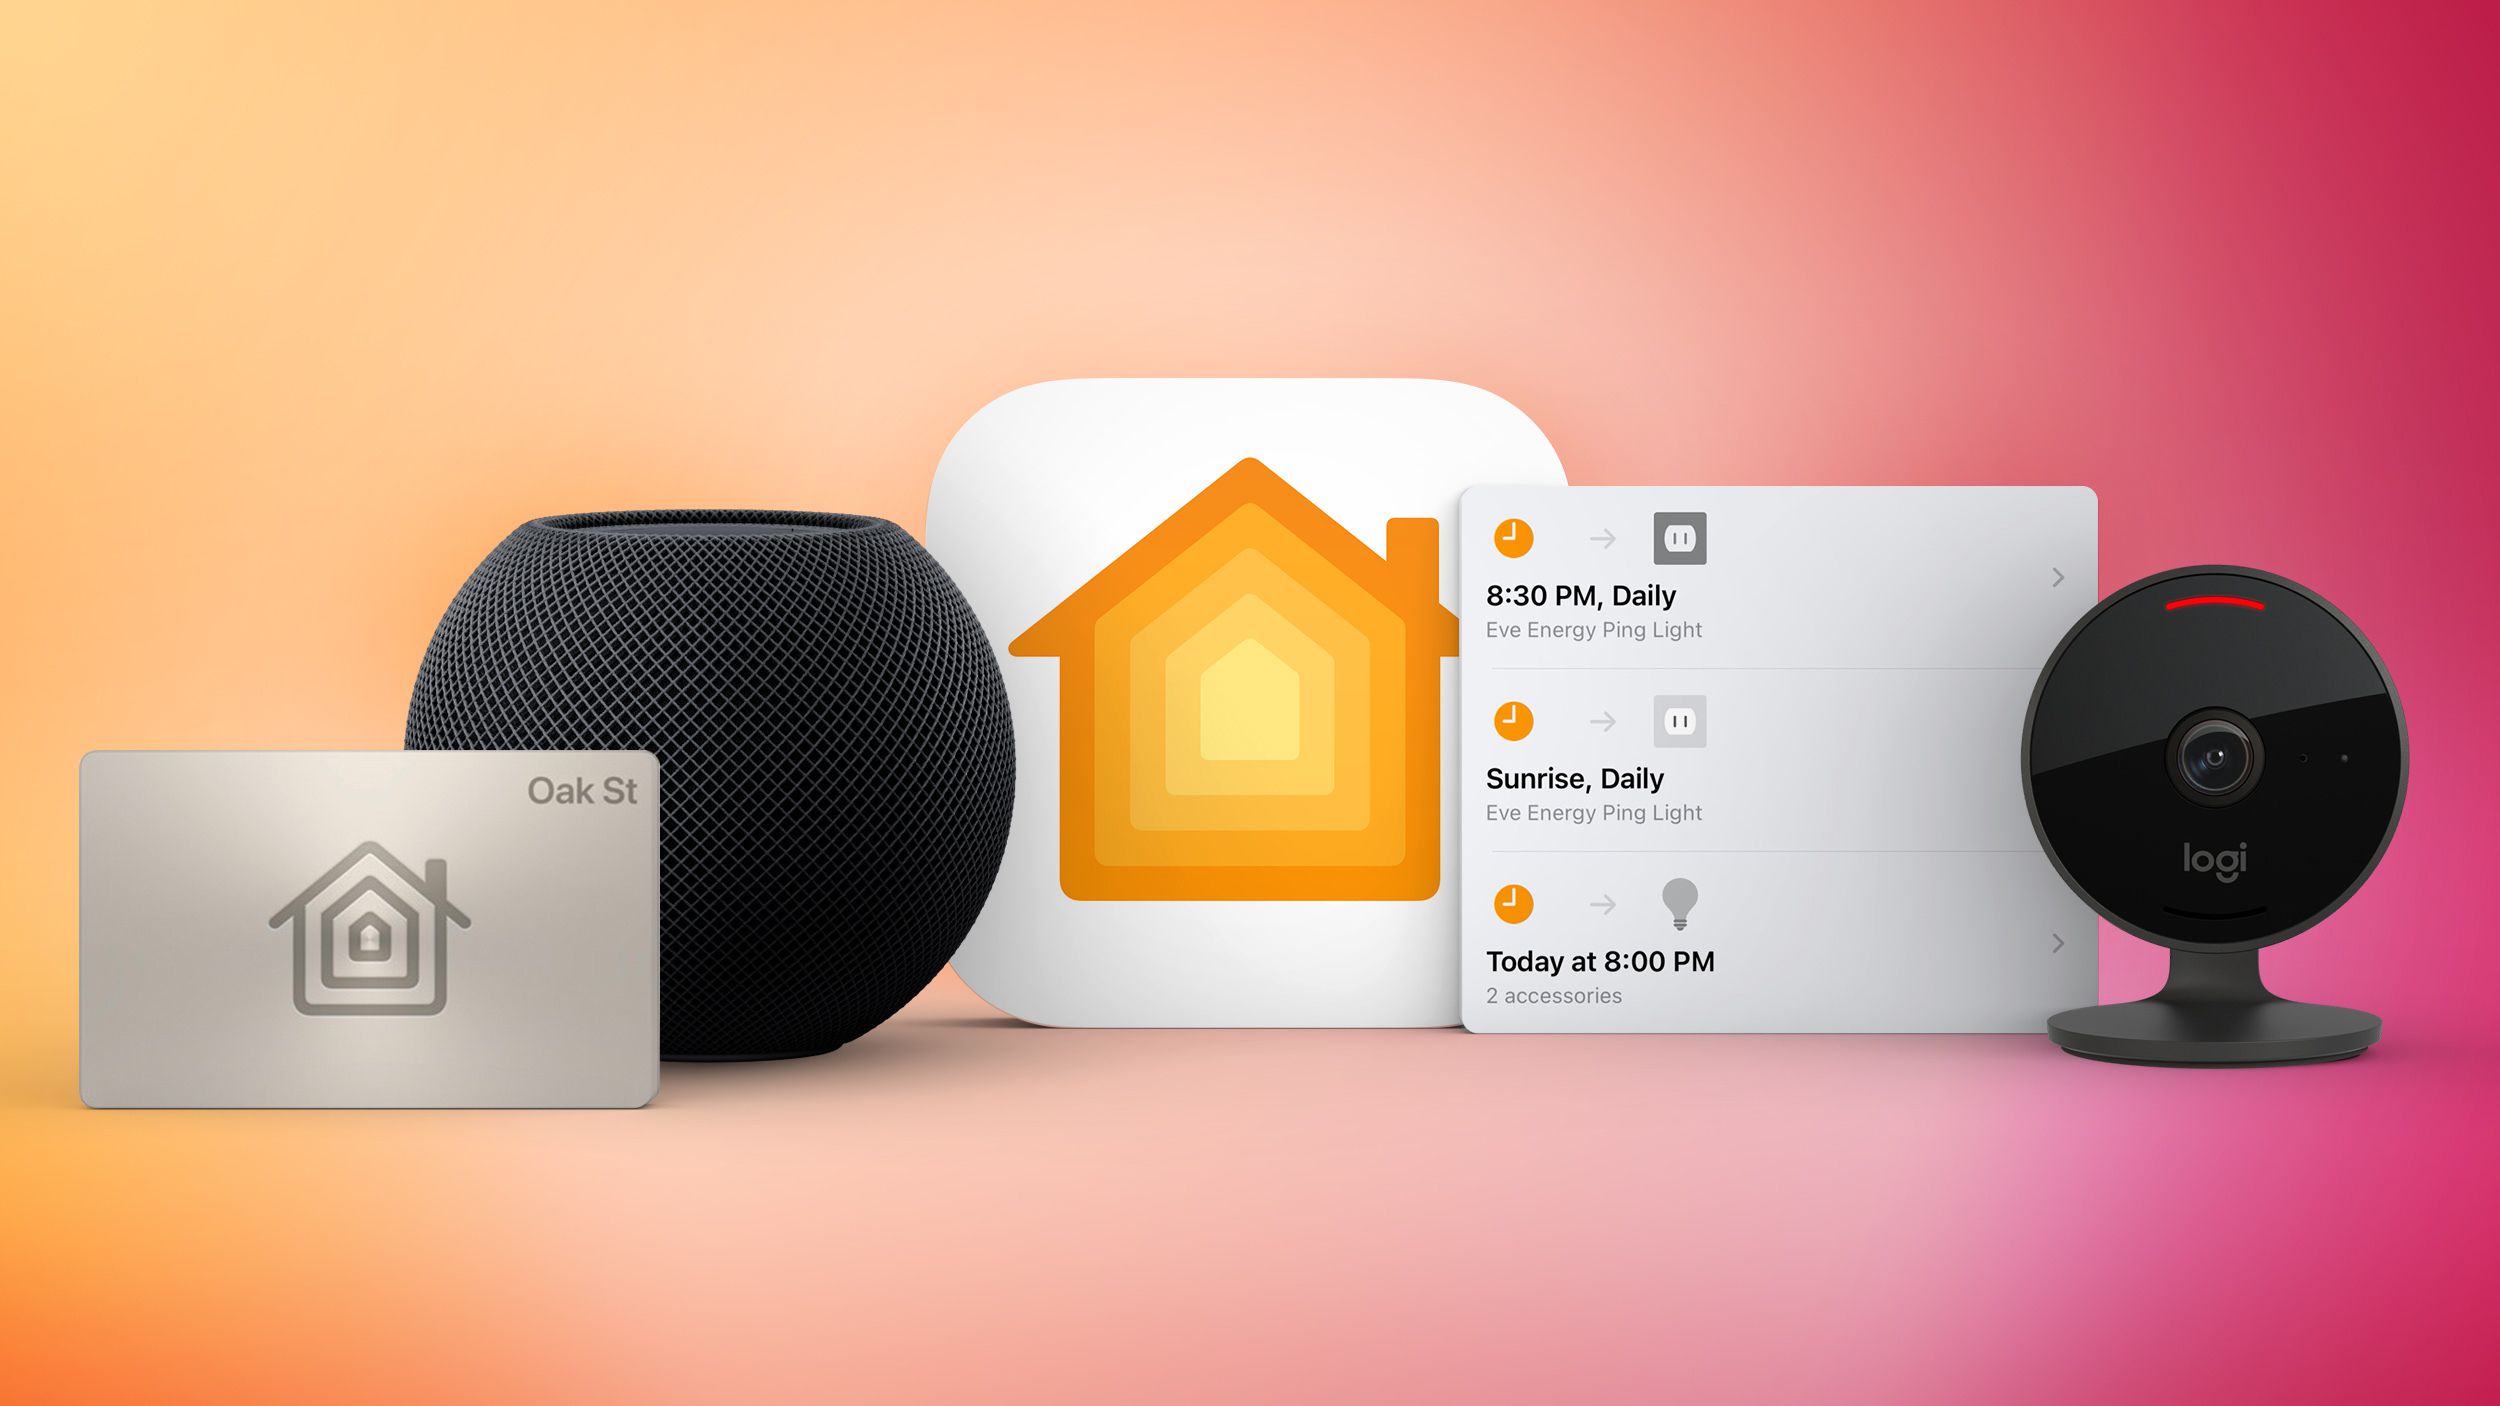 iOS 15 didn't focus heavily on improvements to HomeKit and the Home app, but there are some notable features like expanded HomeKit Secure Video suppor